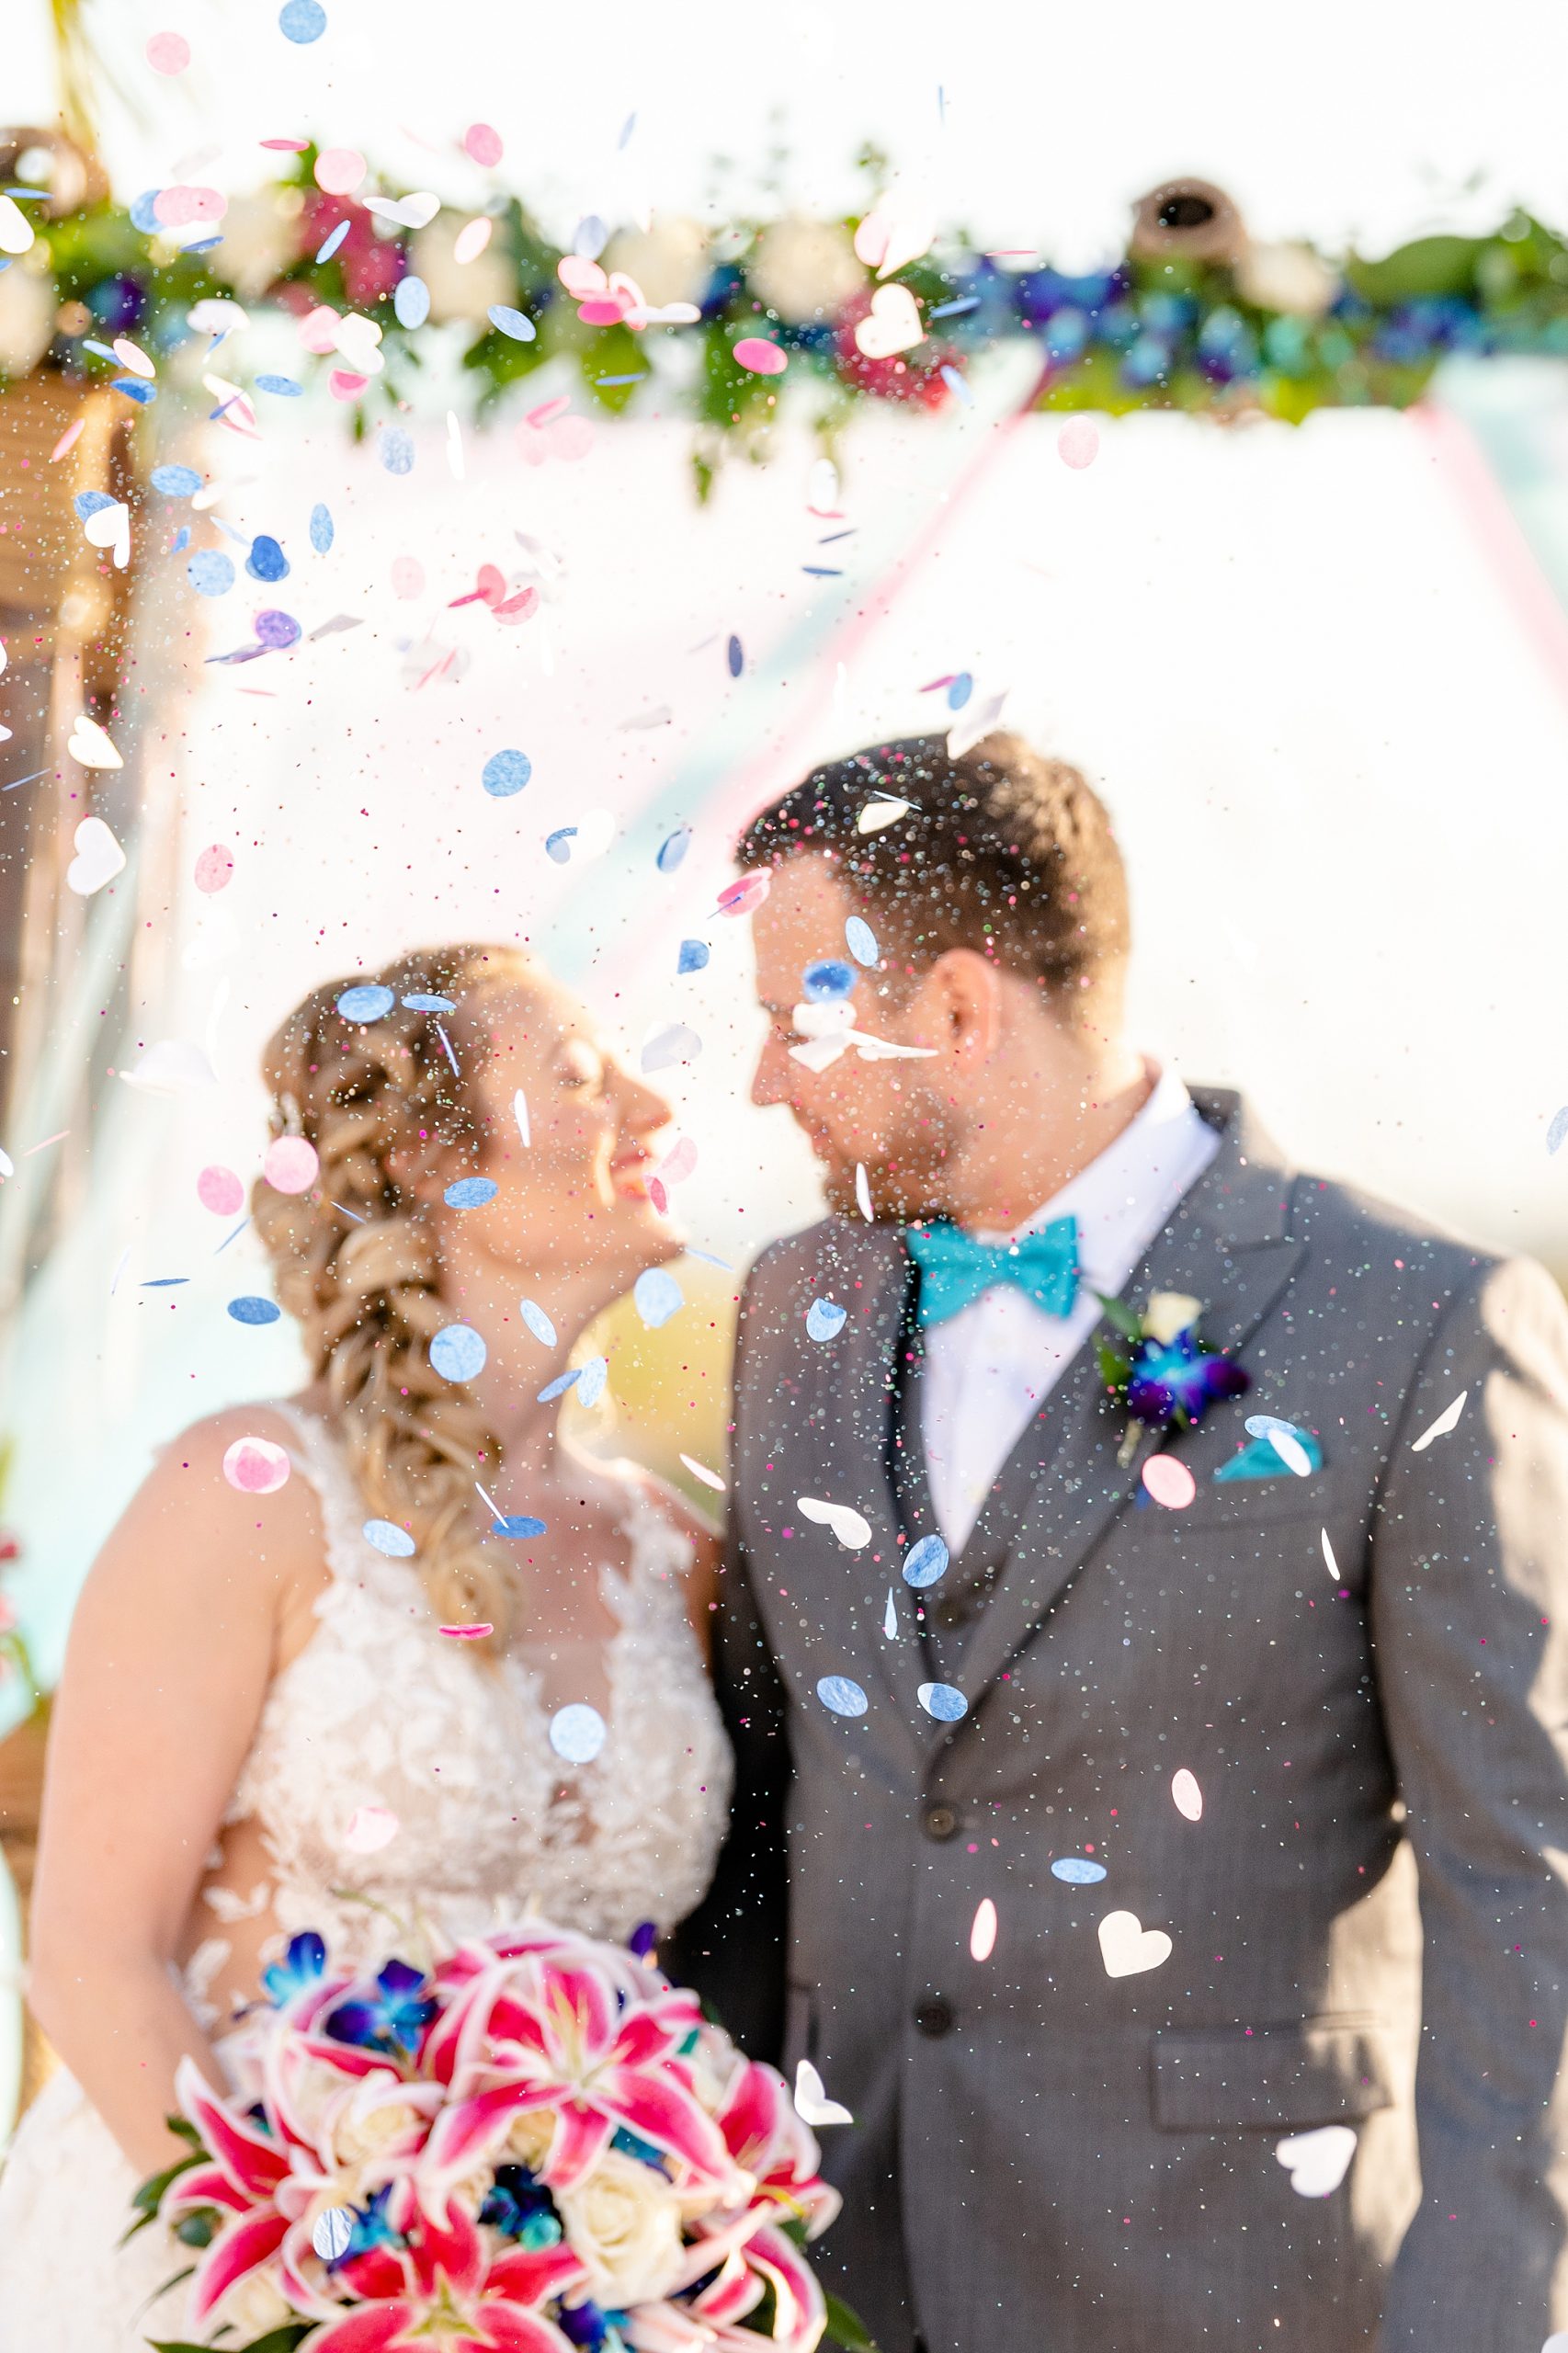 I now pronounce you Bride and Groom | Confetti at Ceremony